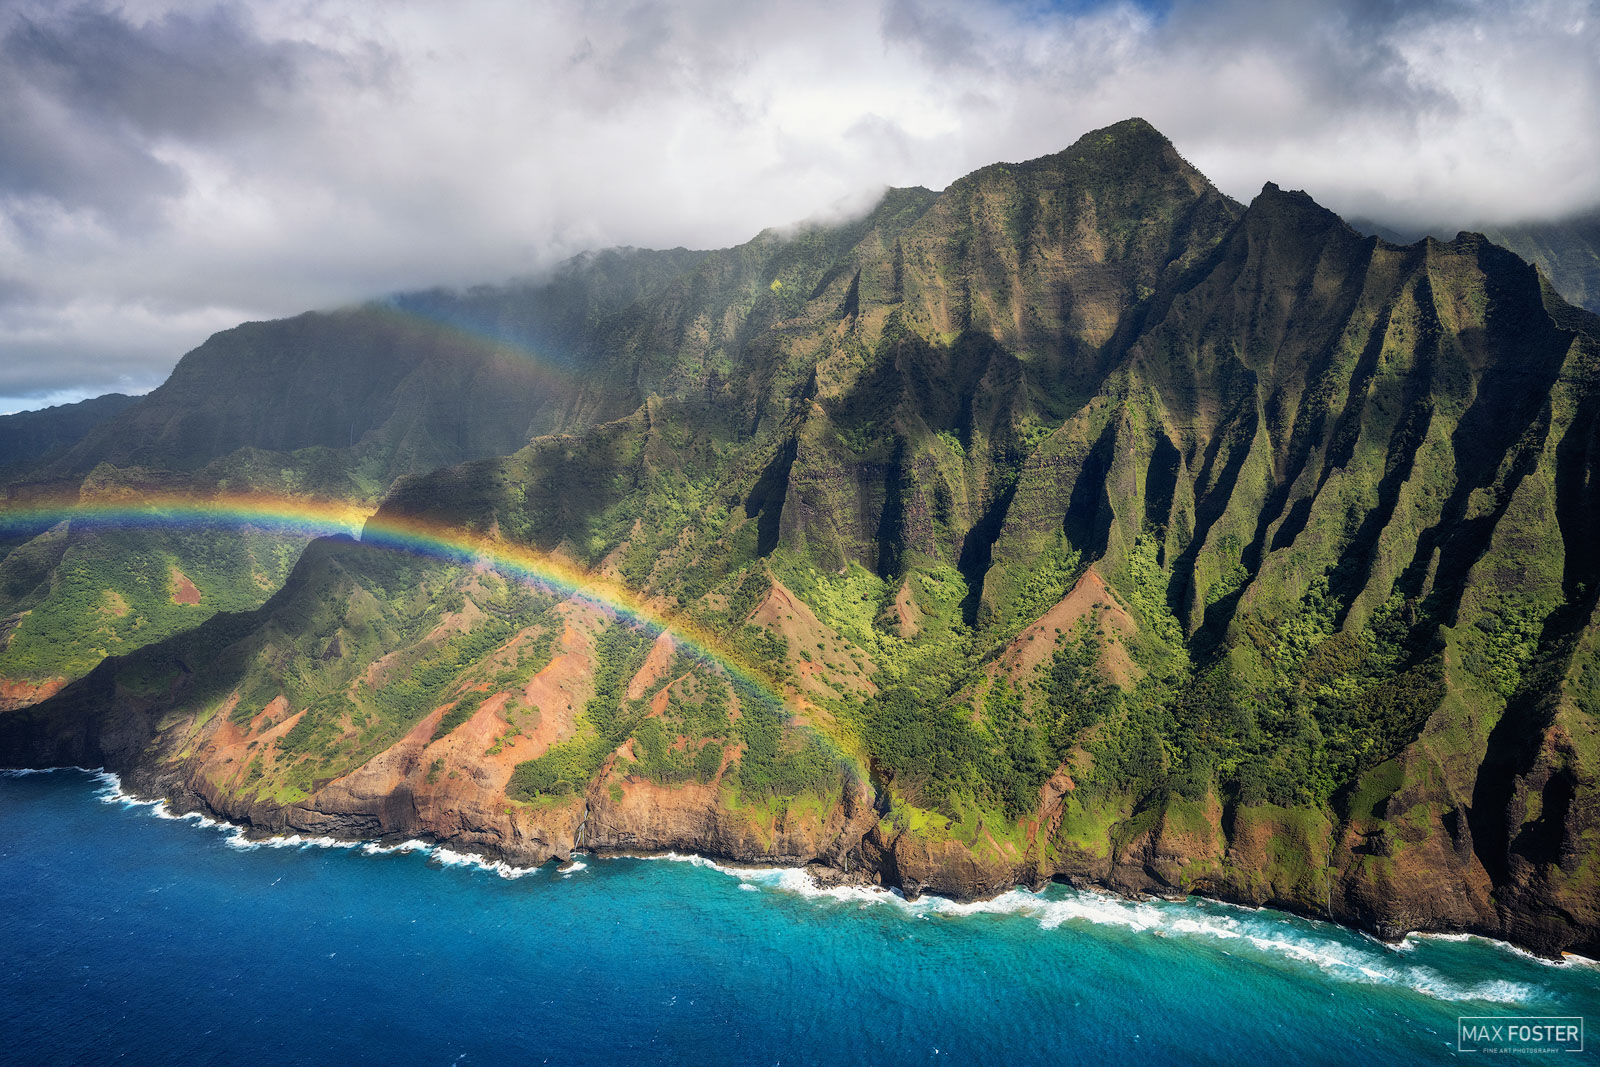 Refresh your space with Land of Aloha, Max Foster's limited edition photography print of the Na Pali Coast, Kauai from his Hawaii...